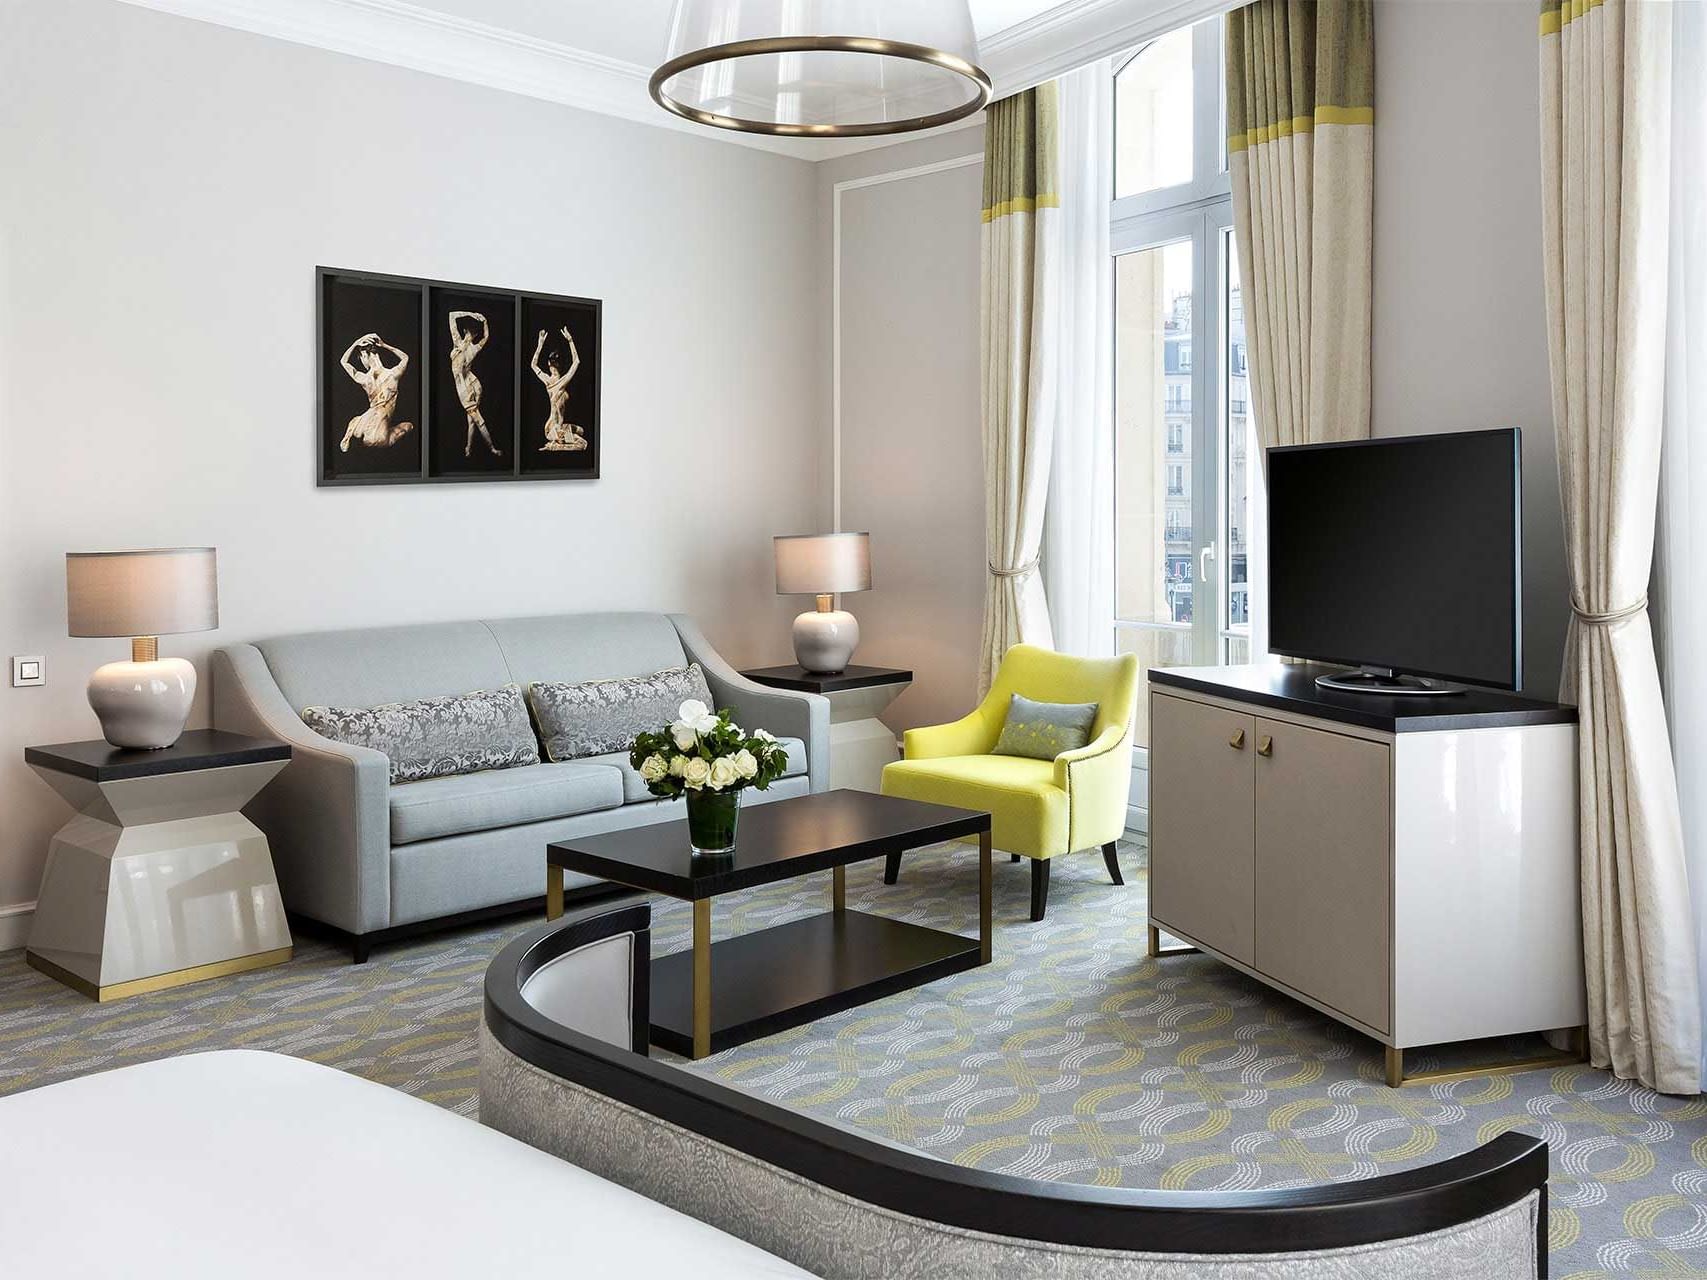 Tv and sofa in King Master Suite at Hilton Paris Opera Hotel